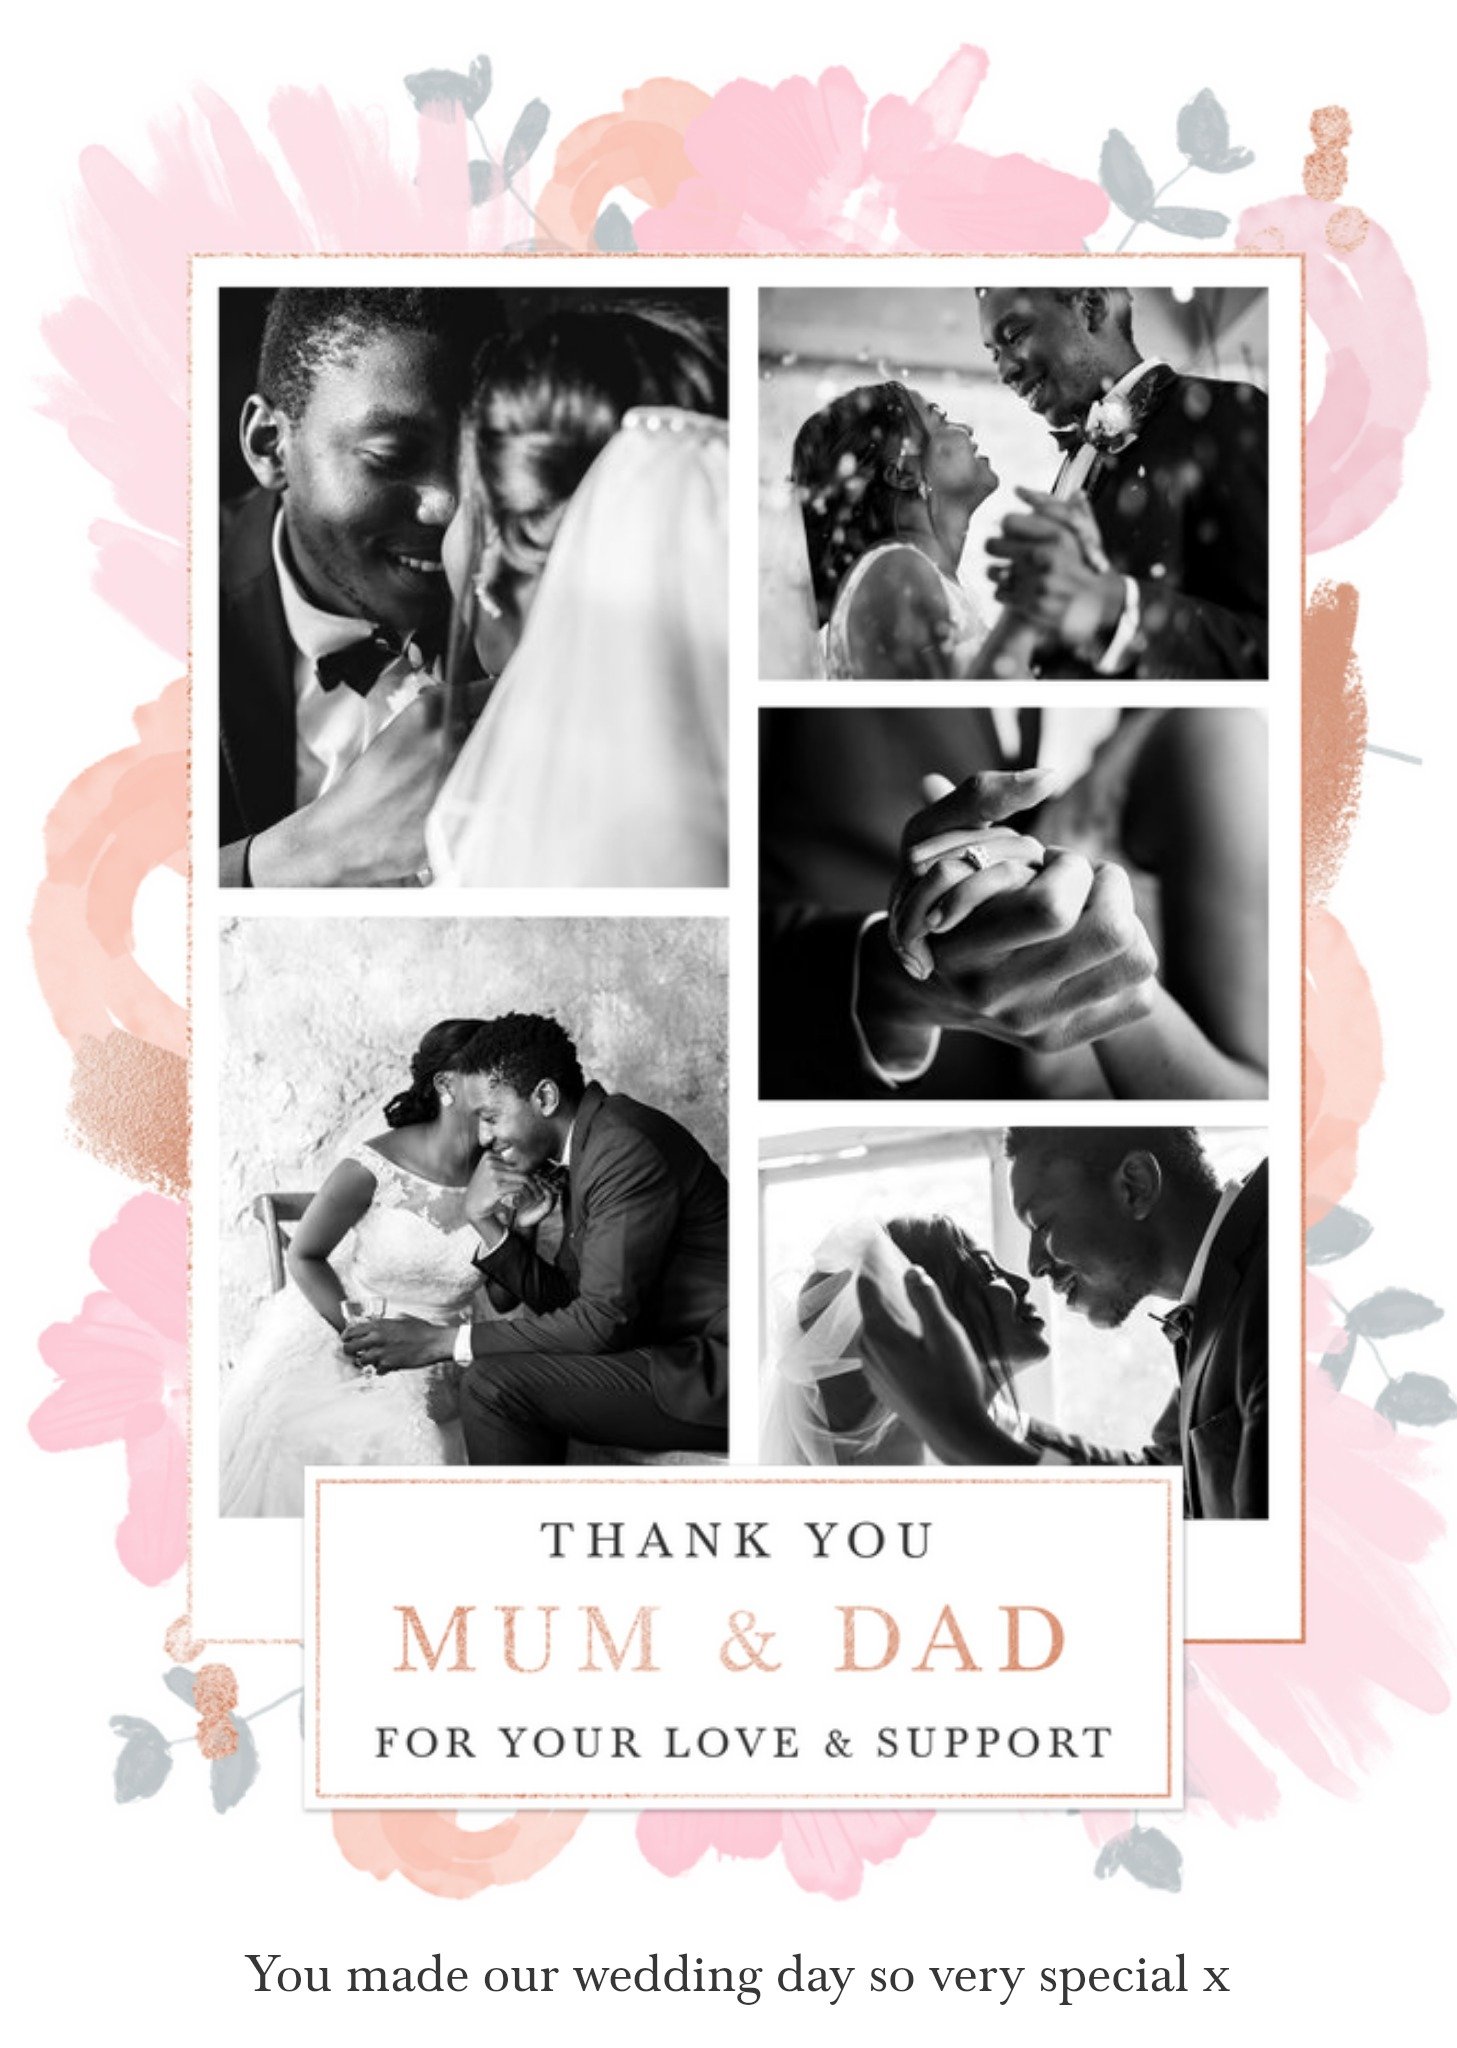 Moonpig Wedding Card - Thank You - Mum & Dad - For Your Love And Support - Photo Upload Ecard